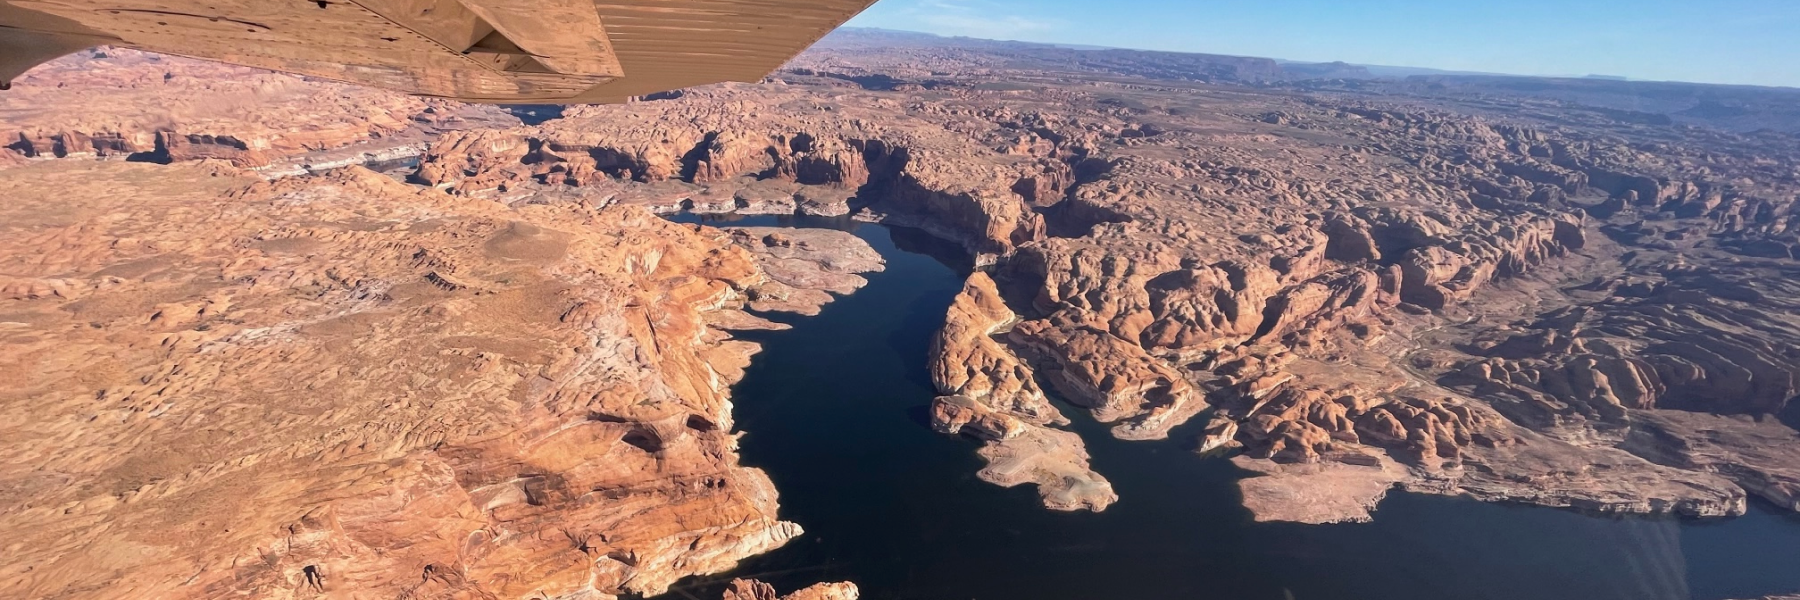 View of Arizona desert from small aircraft